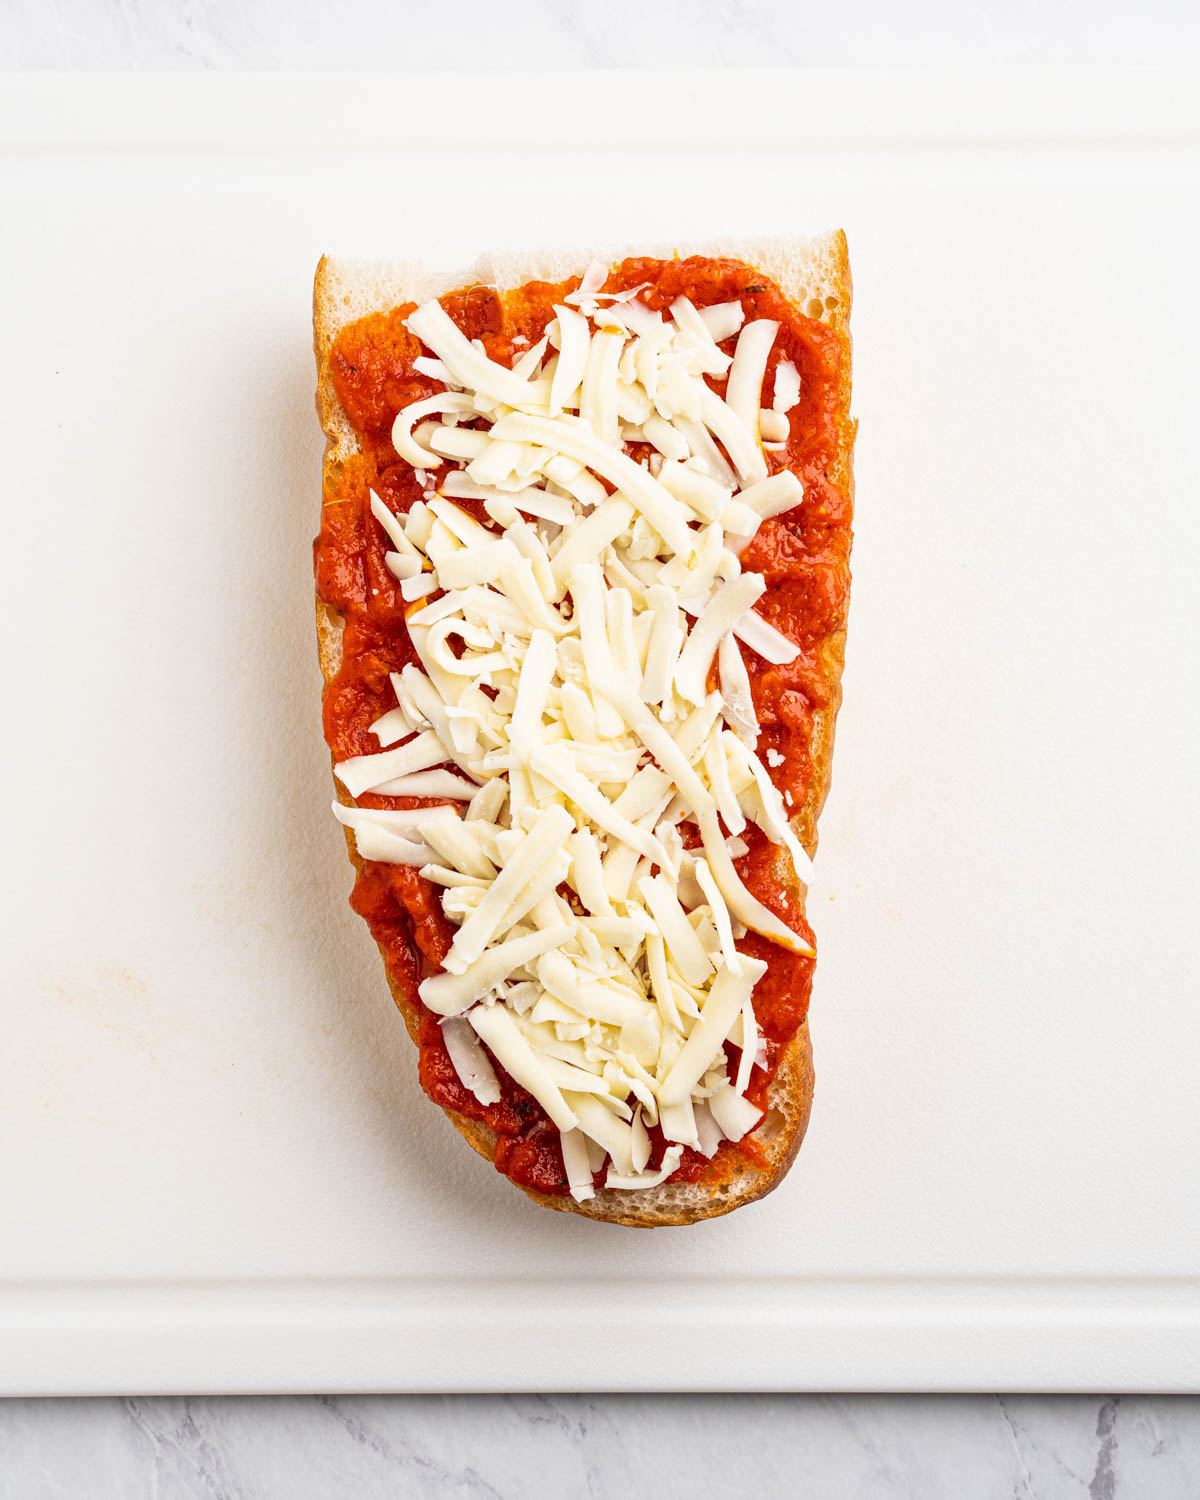 A french bread pizza has pizza sauce and shredded mozzarella cheese. 